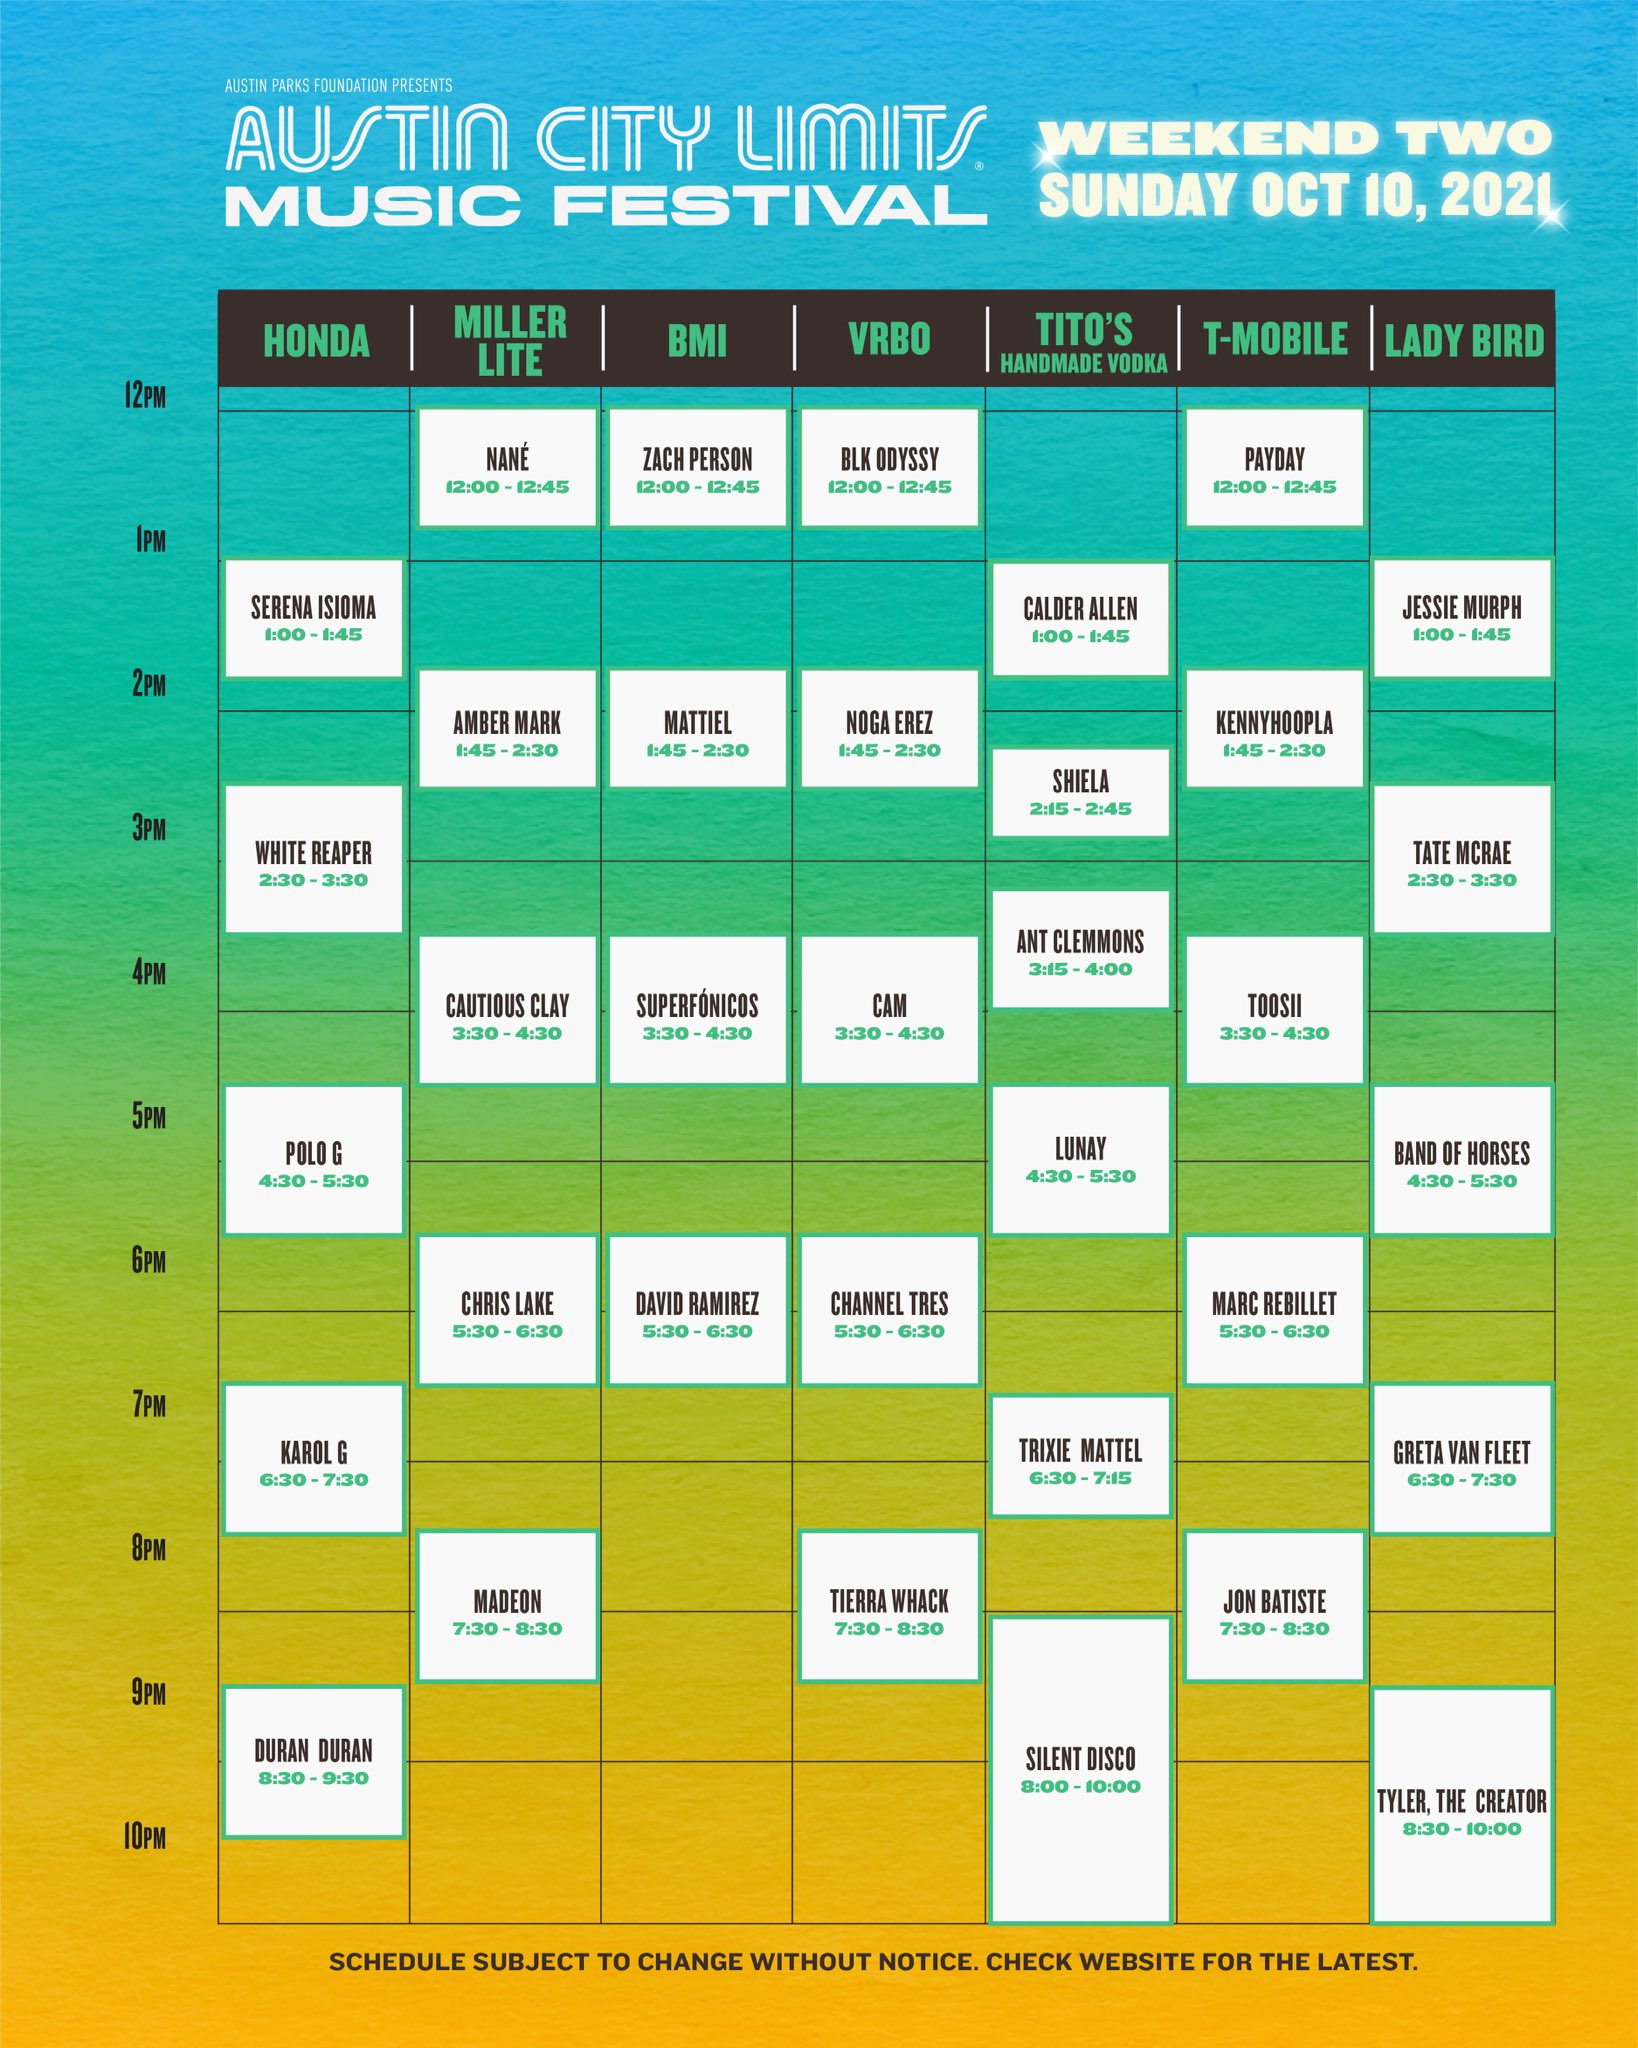 welzijn appel Medicinaal ACL Festival on Twitter: "Here it is! ✨ Check out the 2021 #ACLFest  Schedule and start planning your weekend down to the minute. Lunay, Frances  Forever, Shooks, and Cautious Clay have been